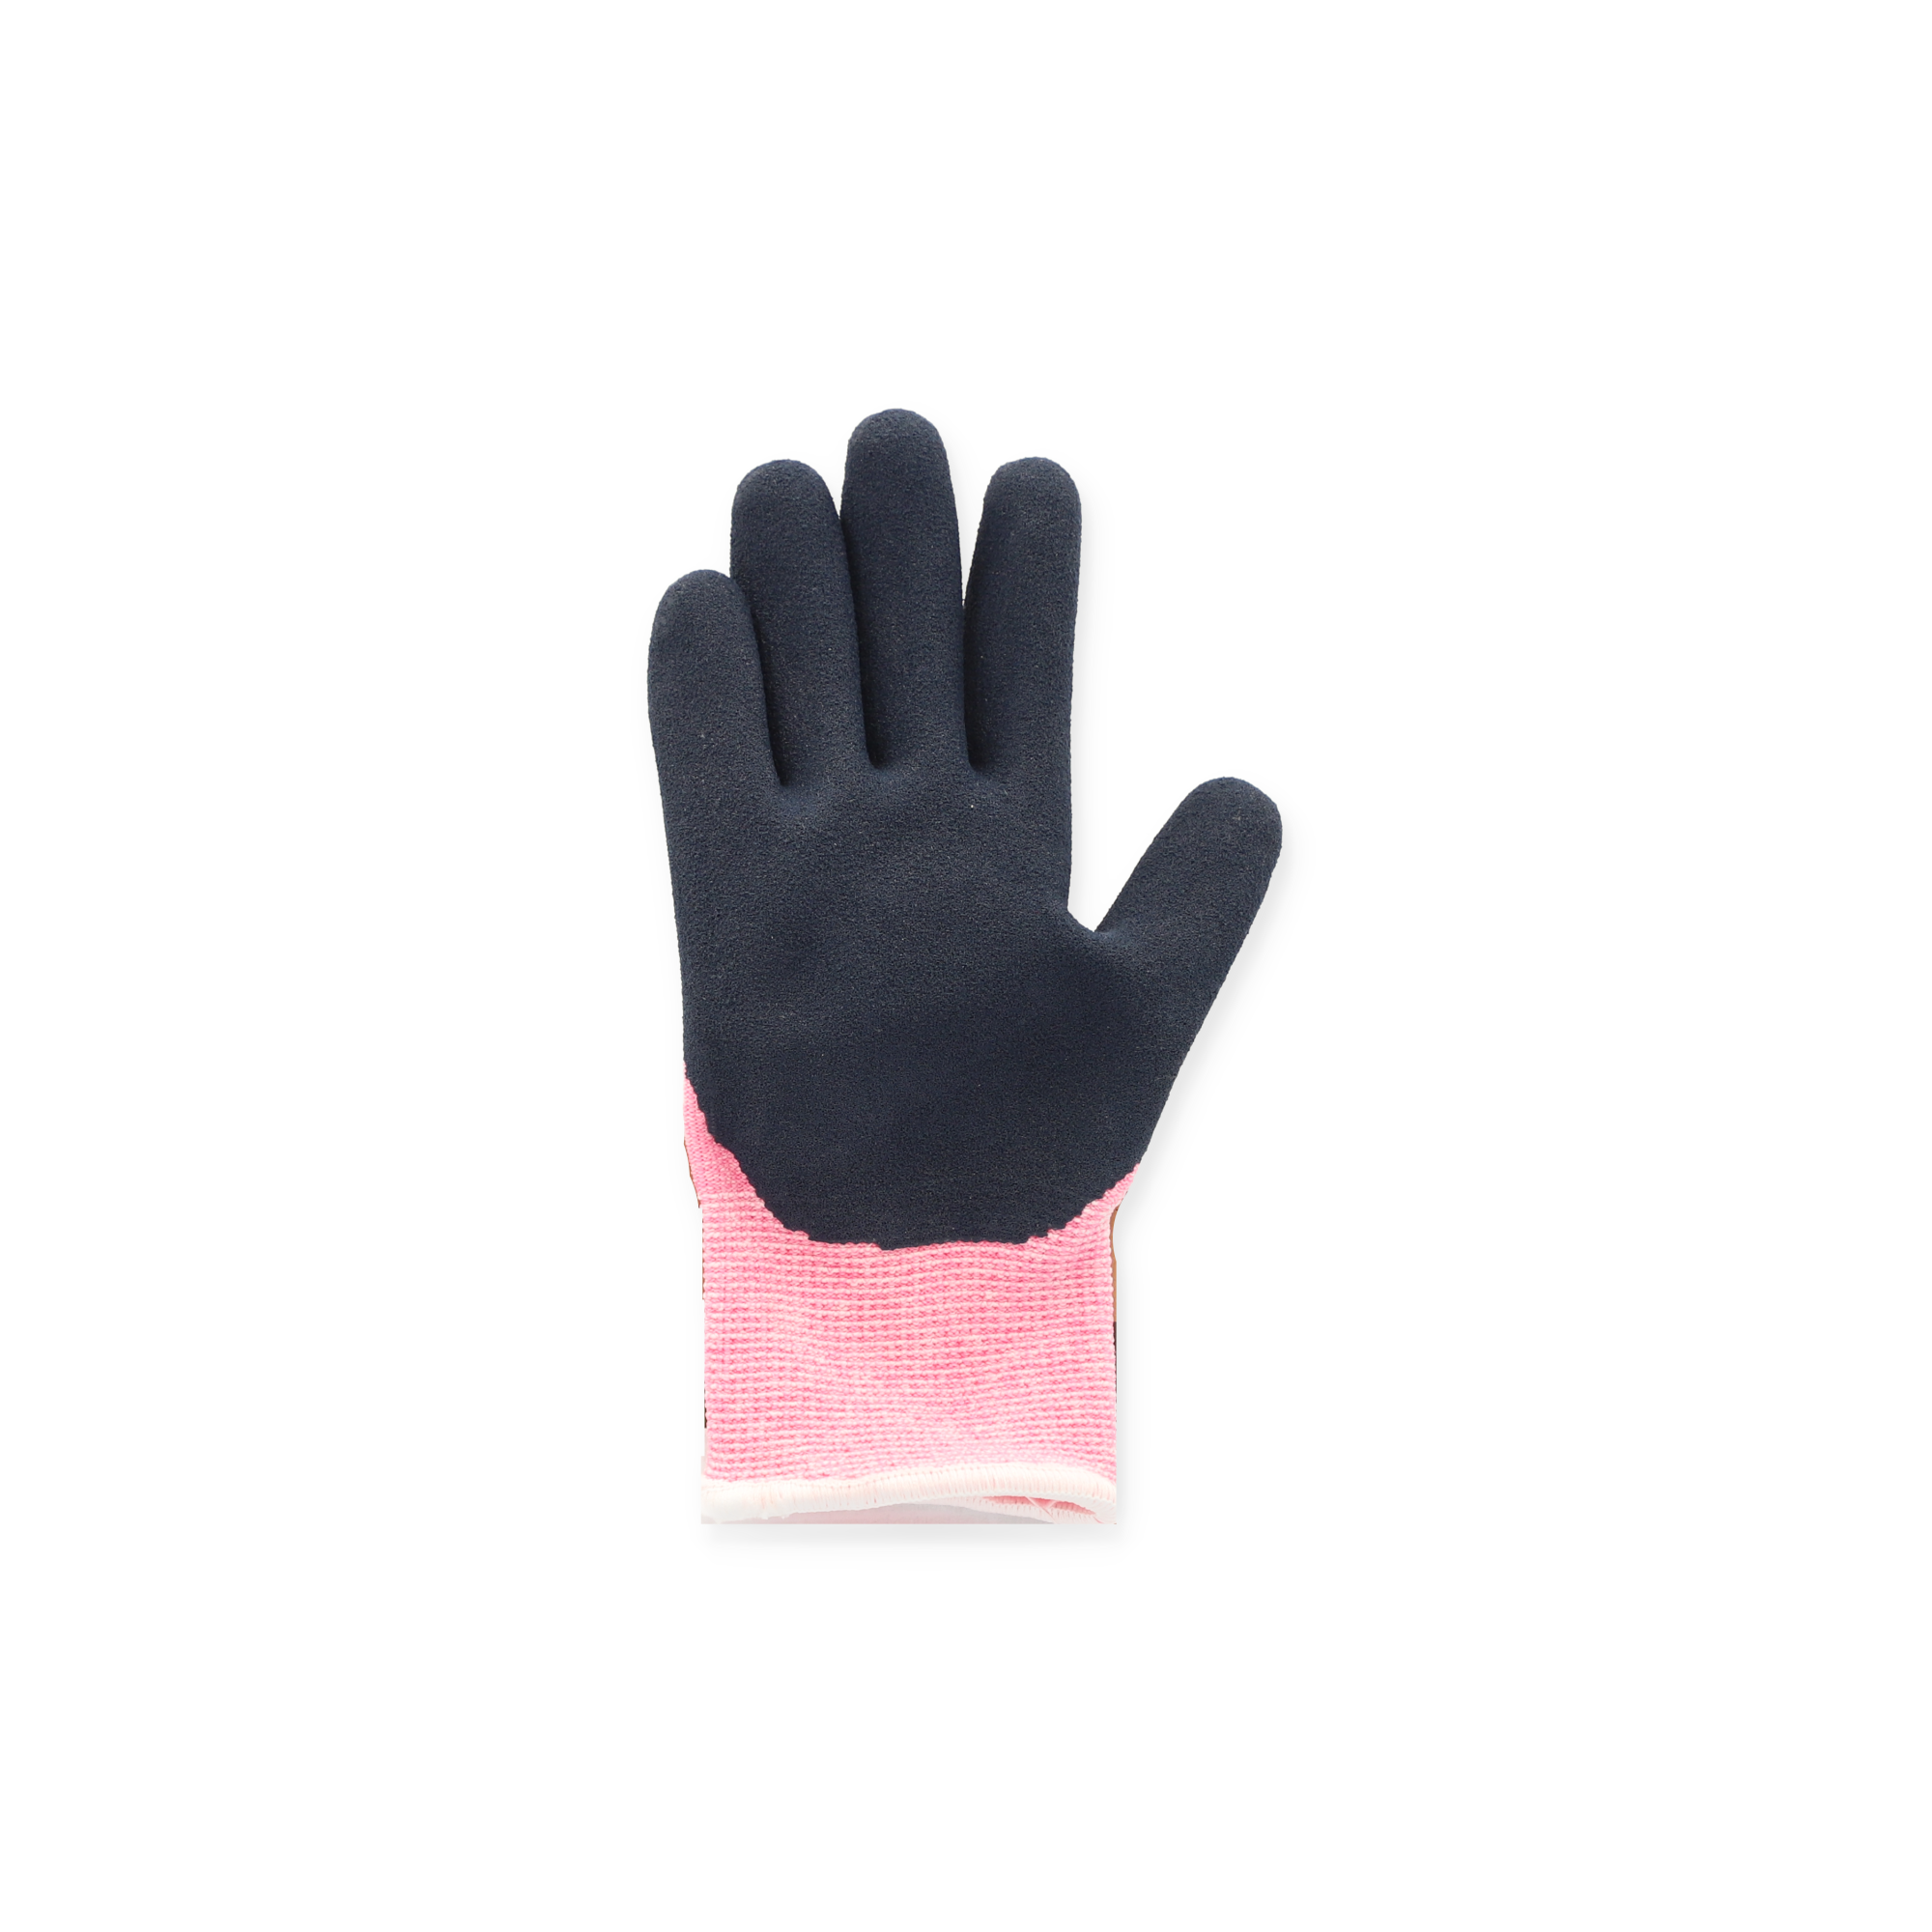 Handschuhe 'Junior 16000' pink 6-8 Jahre + product picture